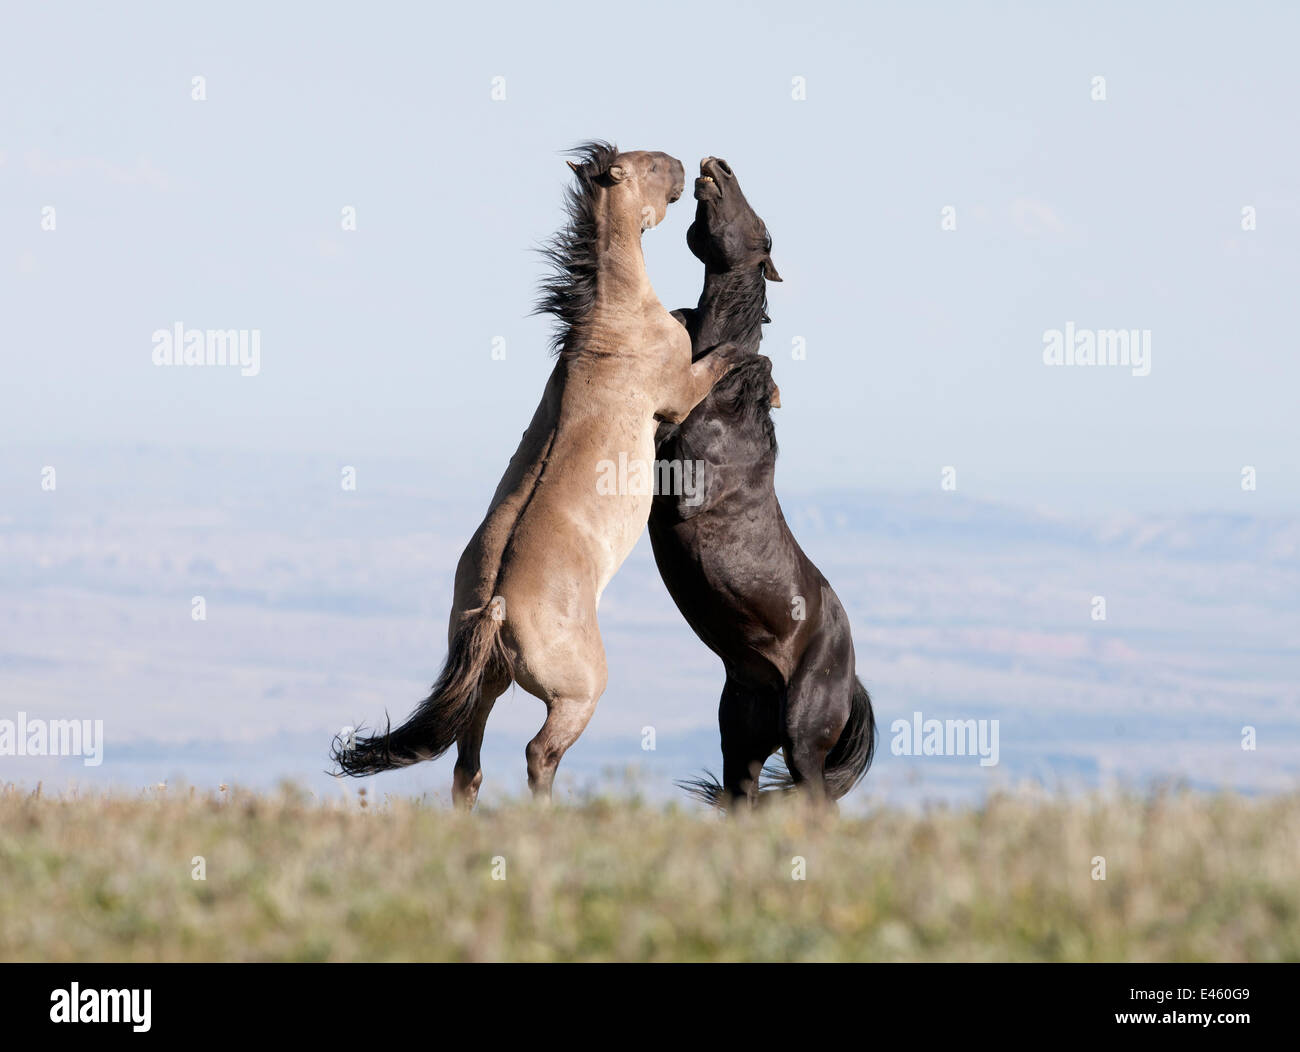 Wild Horses / mustangs, two stallions rearing up fighting, Pryor Mountains, Montana, USA, June Stock Photo